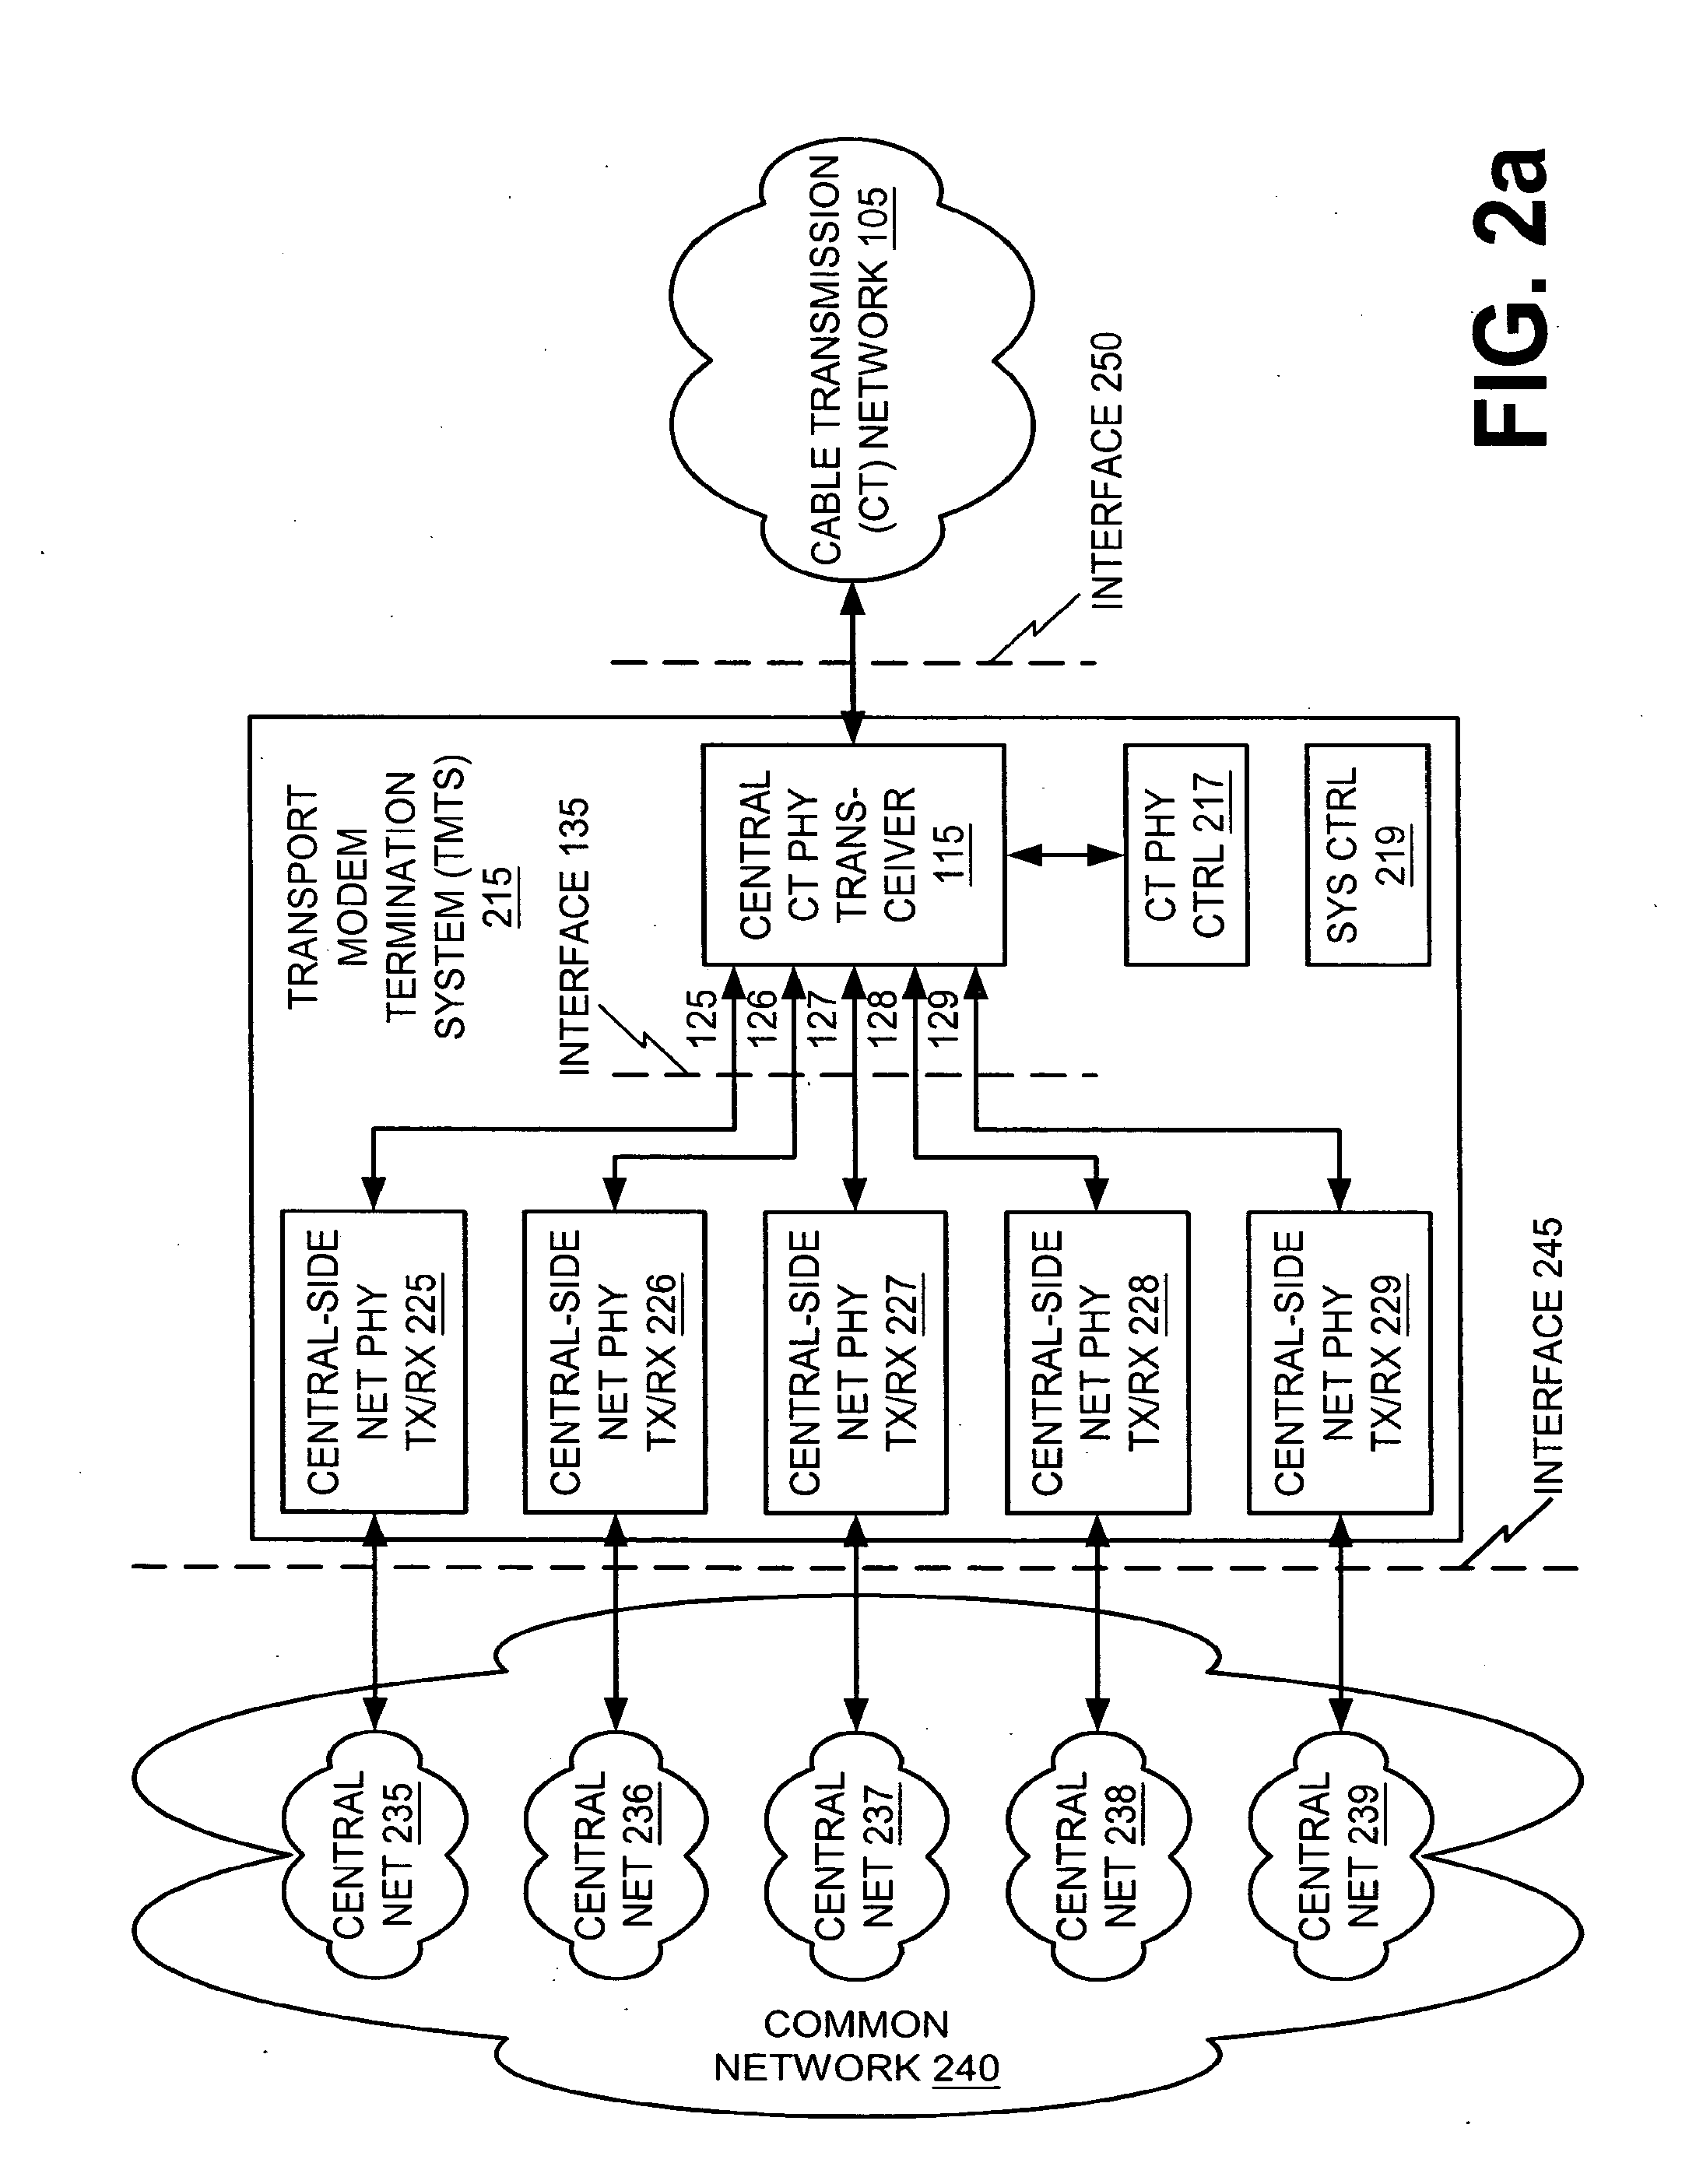 Communication of active data flows between a transport modem termination system and cable transport modems